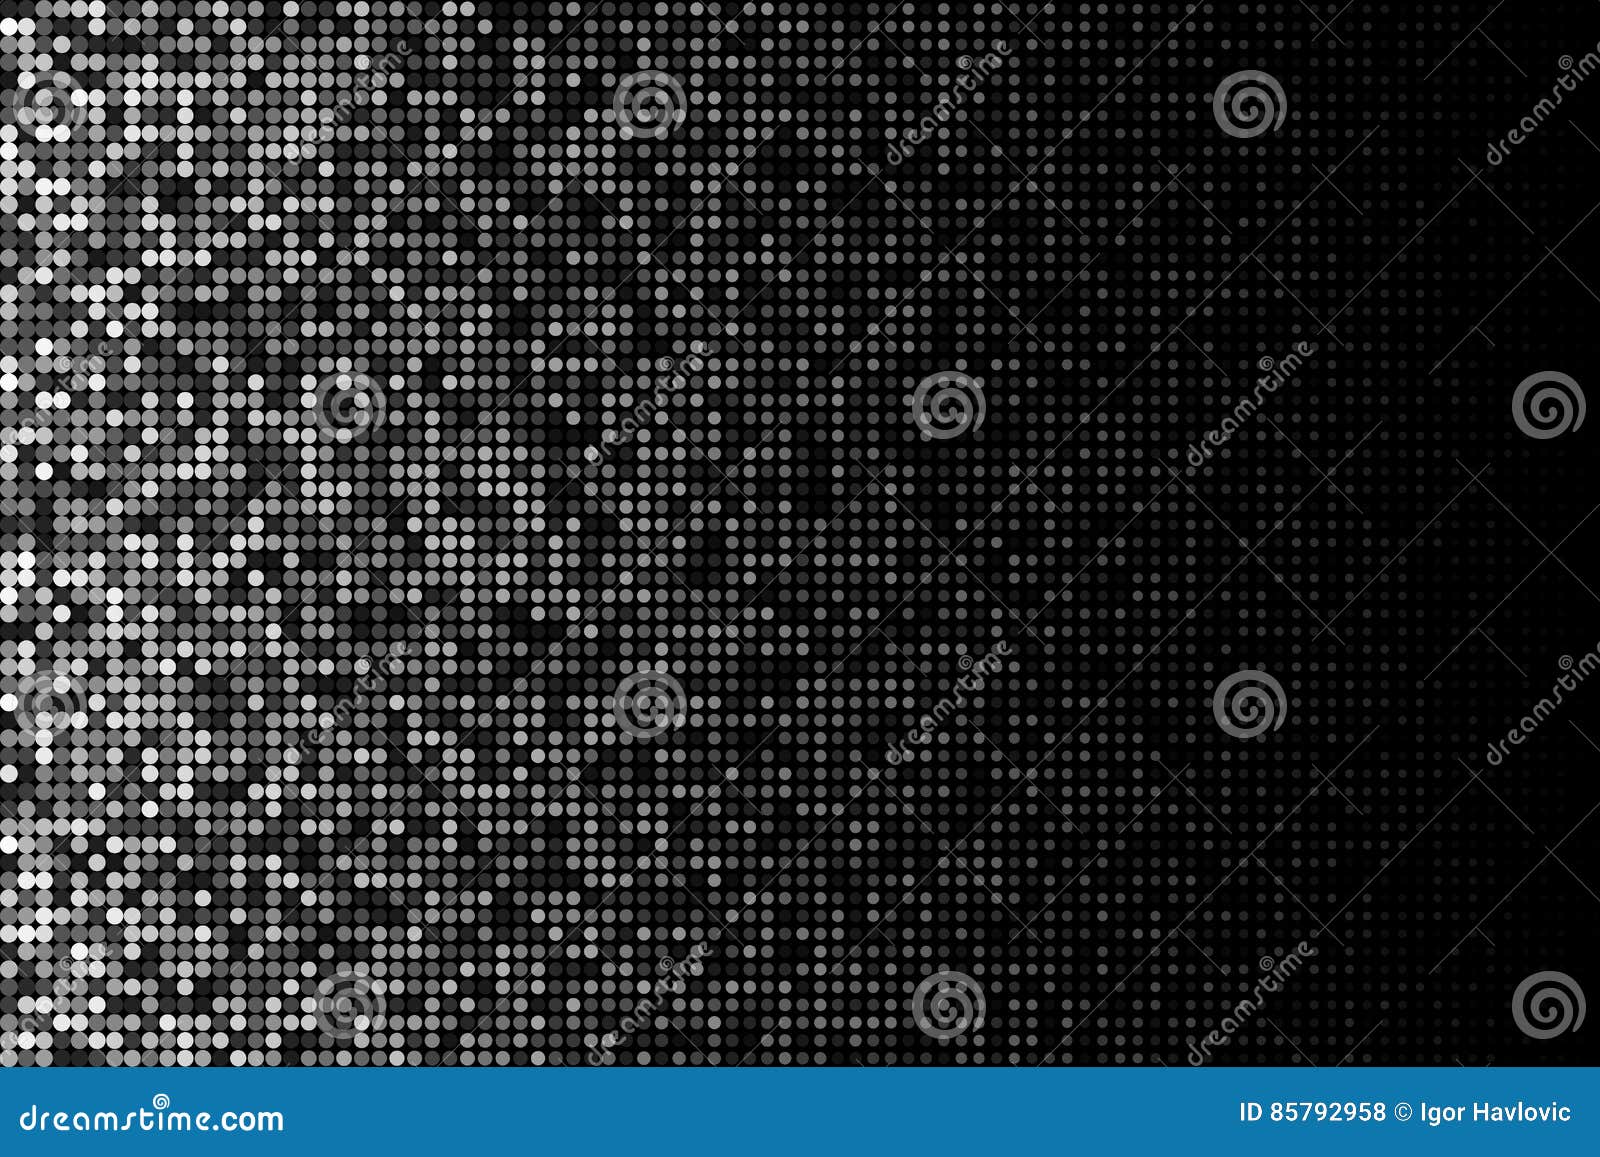  halftone gradient pattern made of dots with randomized opacity.